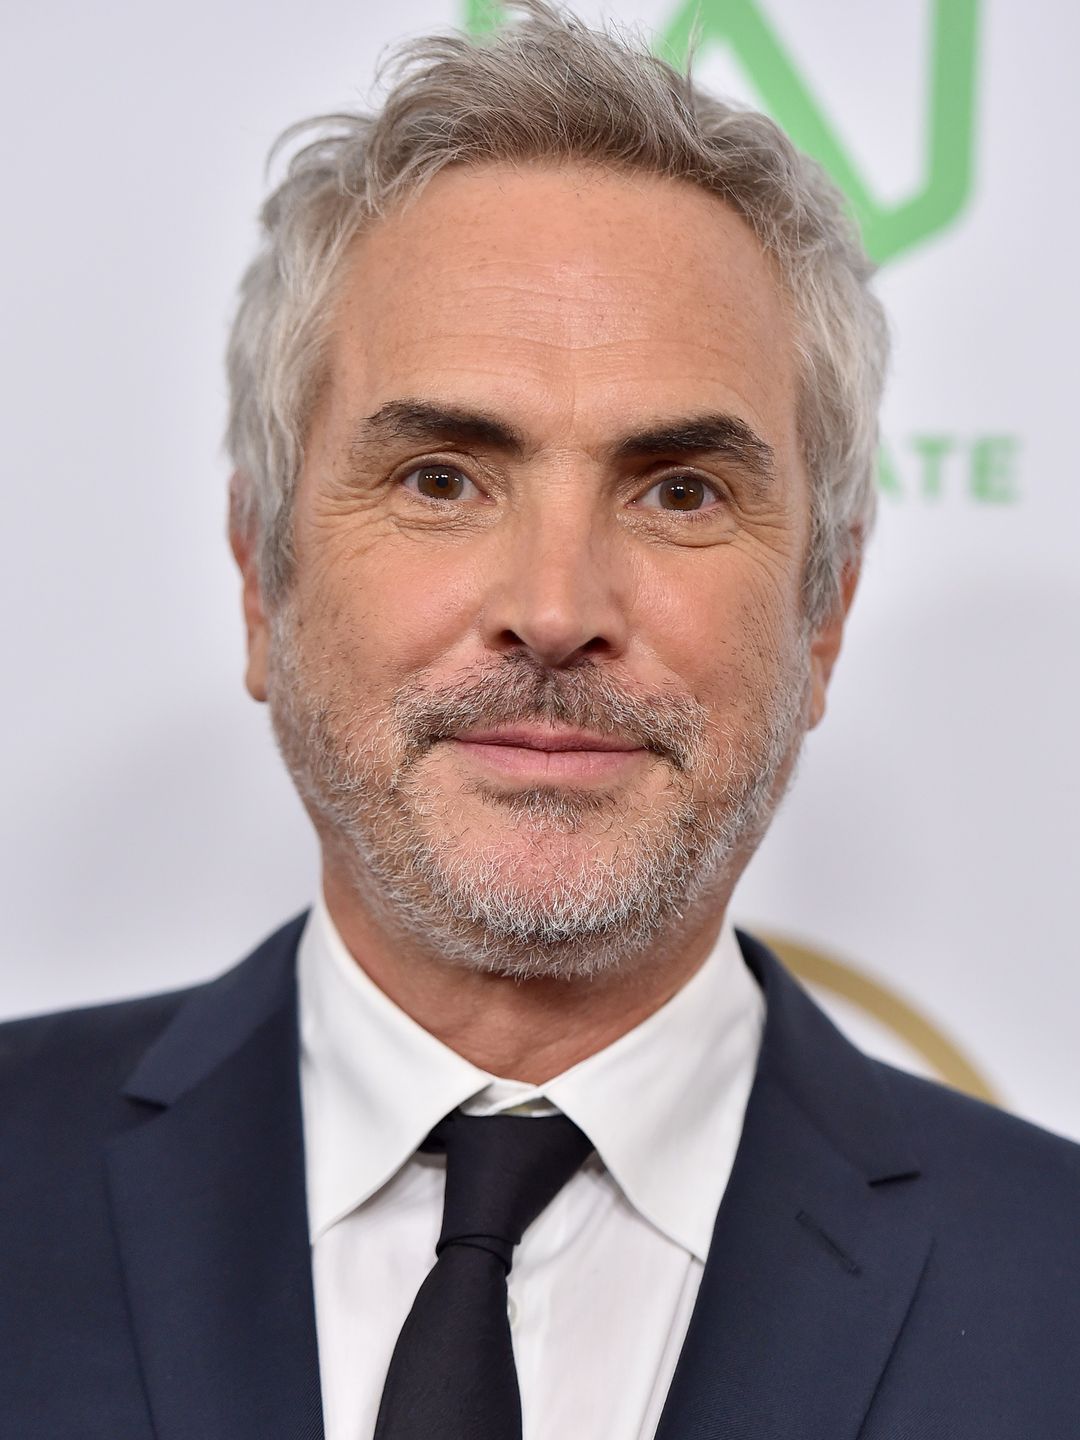 Alfonso Cuarón early childhood